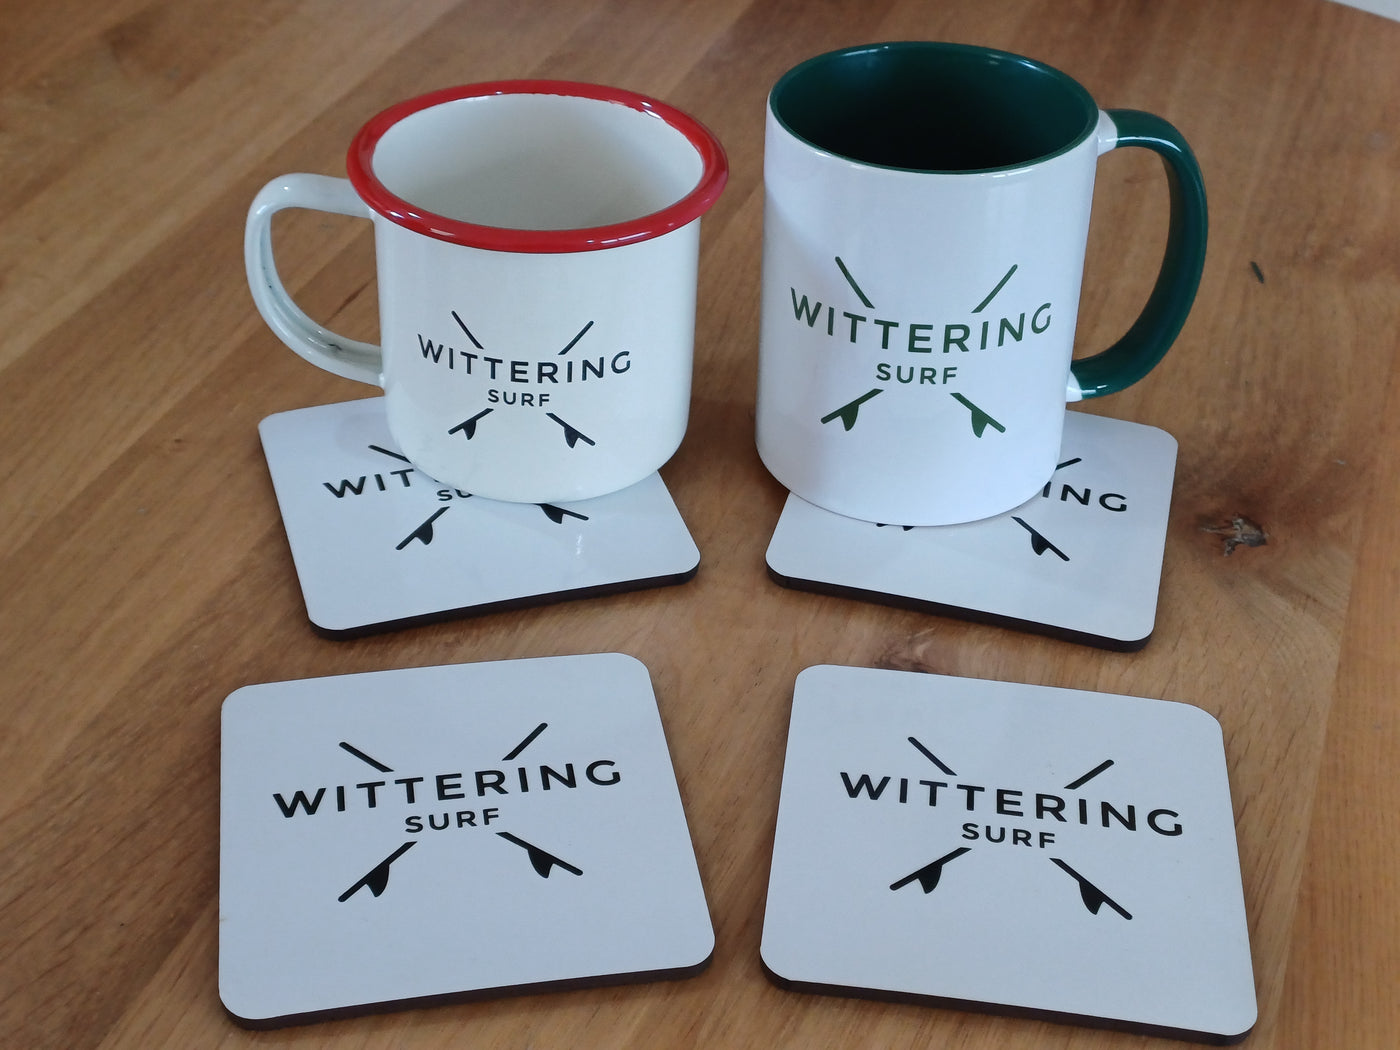 WITTERING SURF COASTERS - SET OF 4